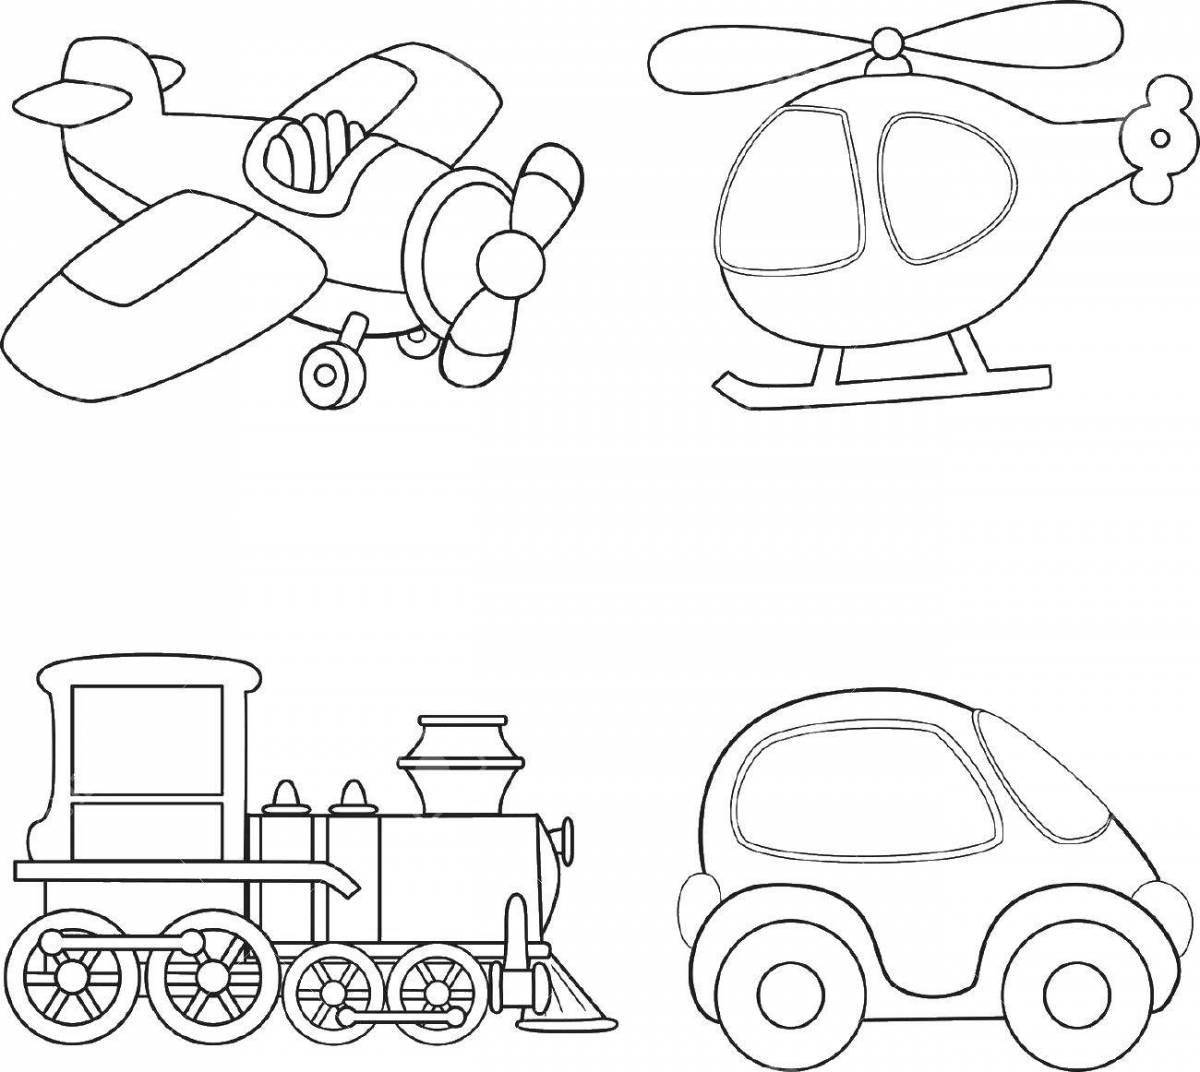 Adorable tram coloring book for 6-7 year olds